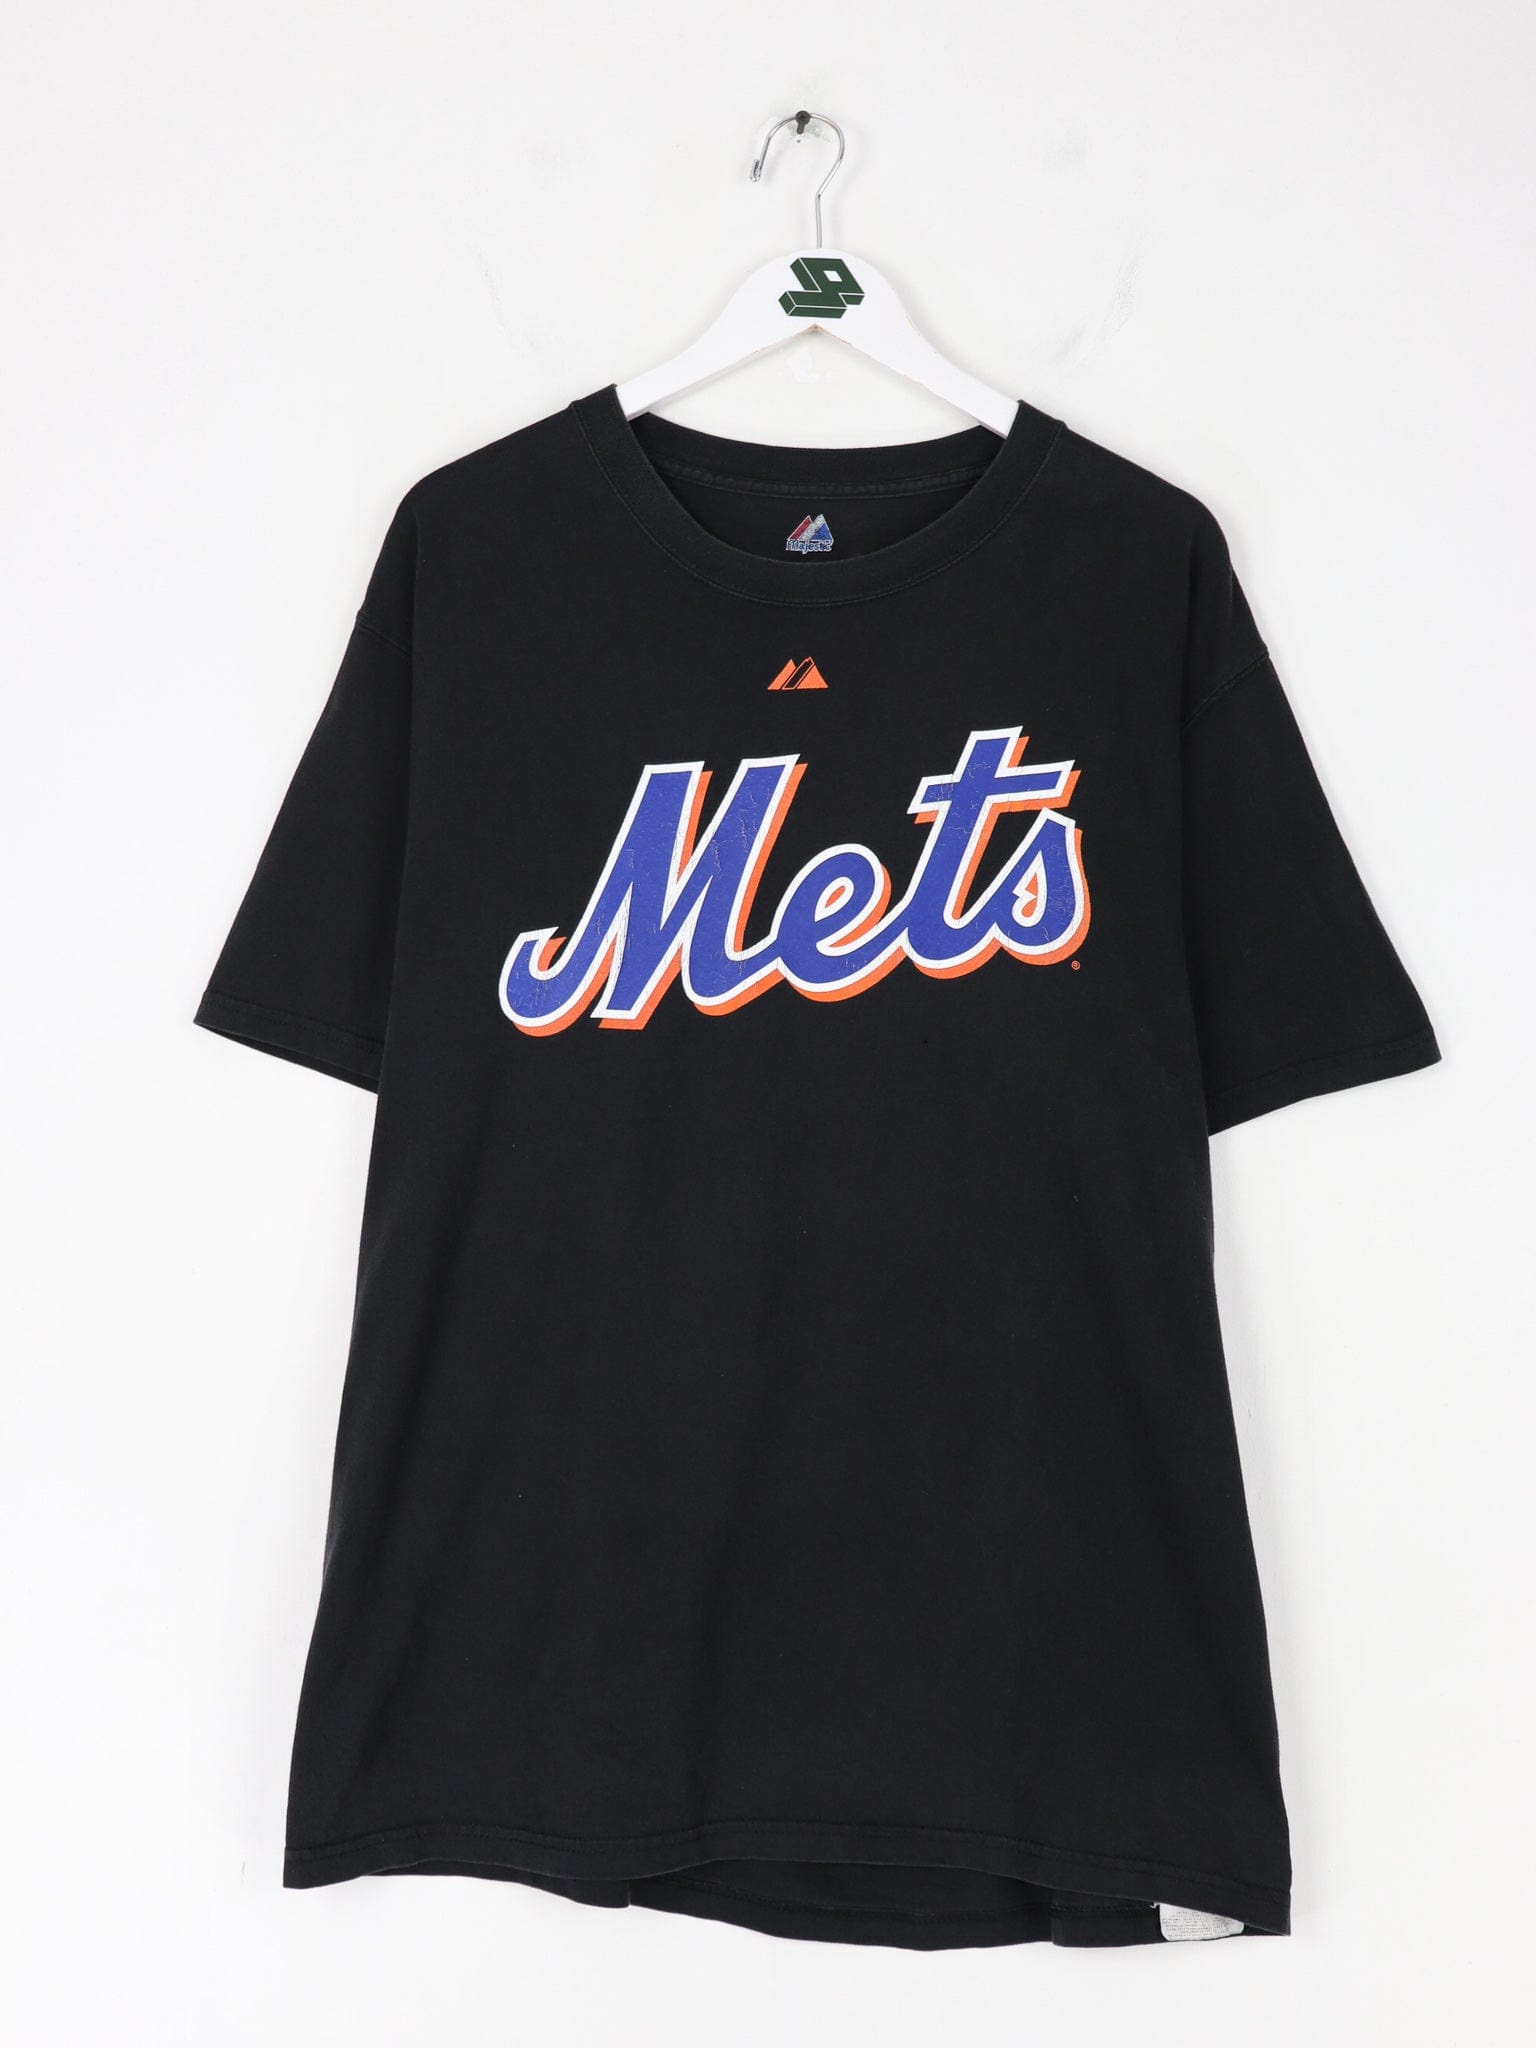 New York Mets - Do you like the David Wright Black Jersey? 🤔 Well